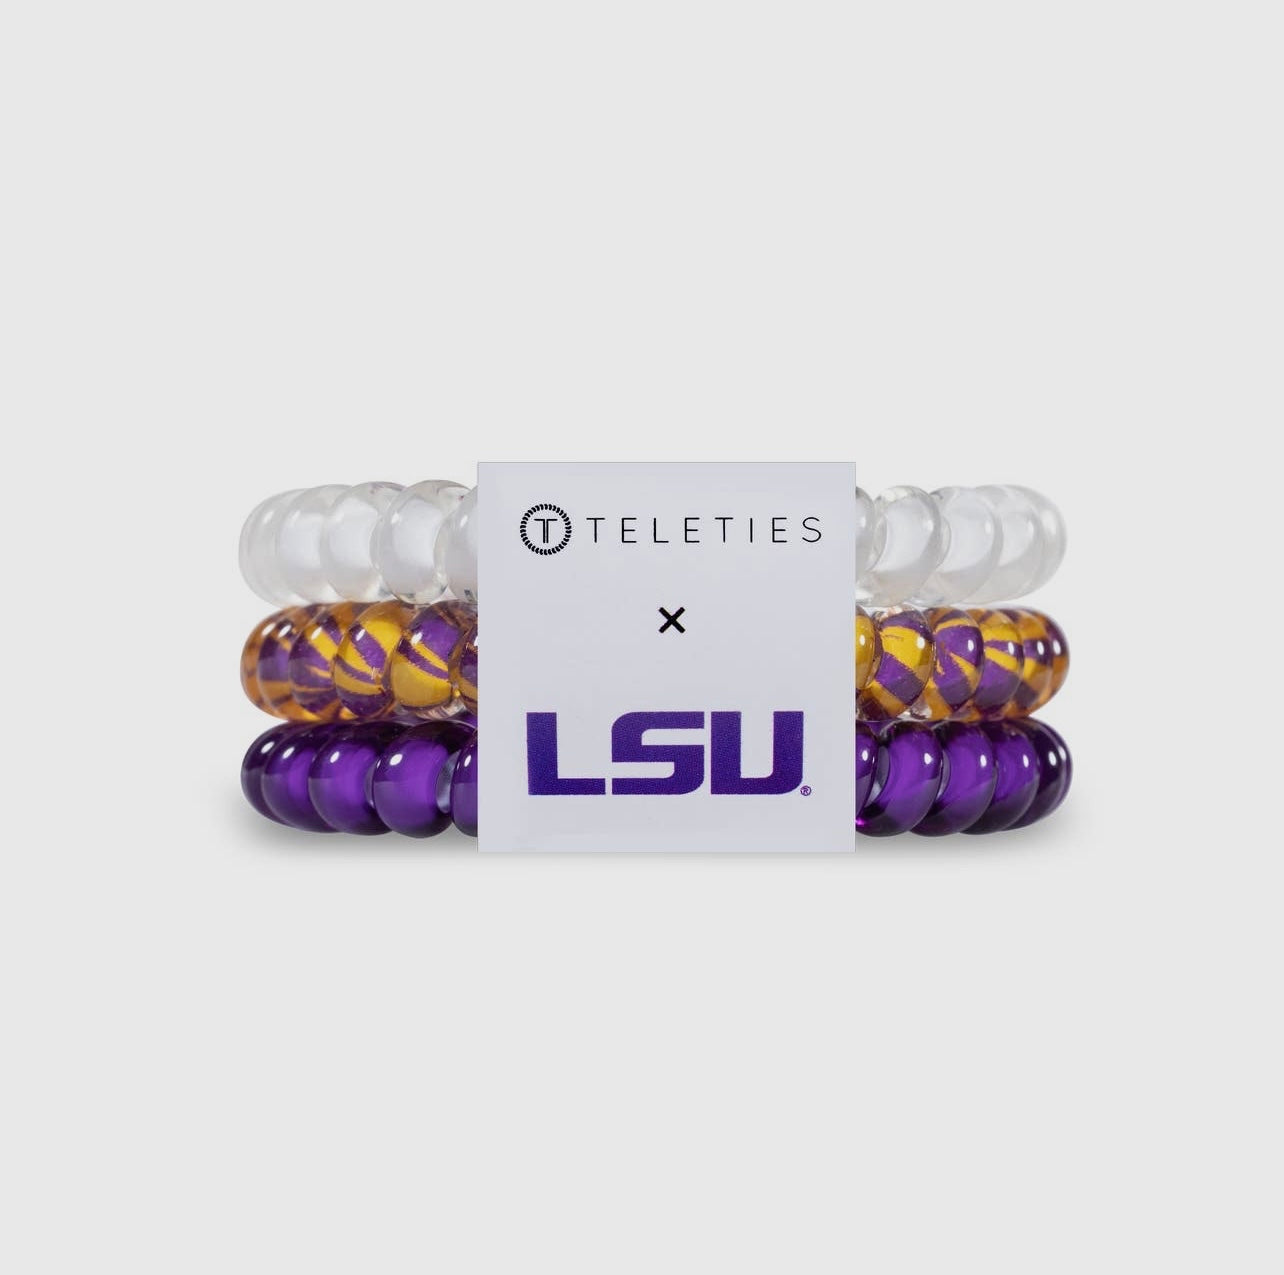 3-pack of Louisiana State University Collegiate Teleties with gold and purple.